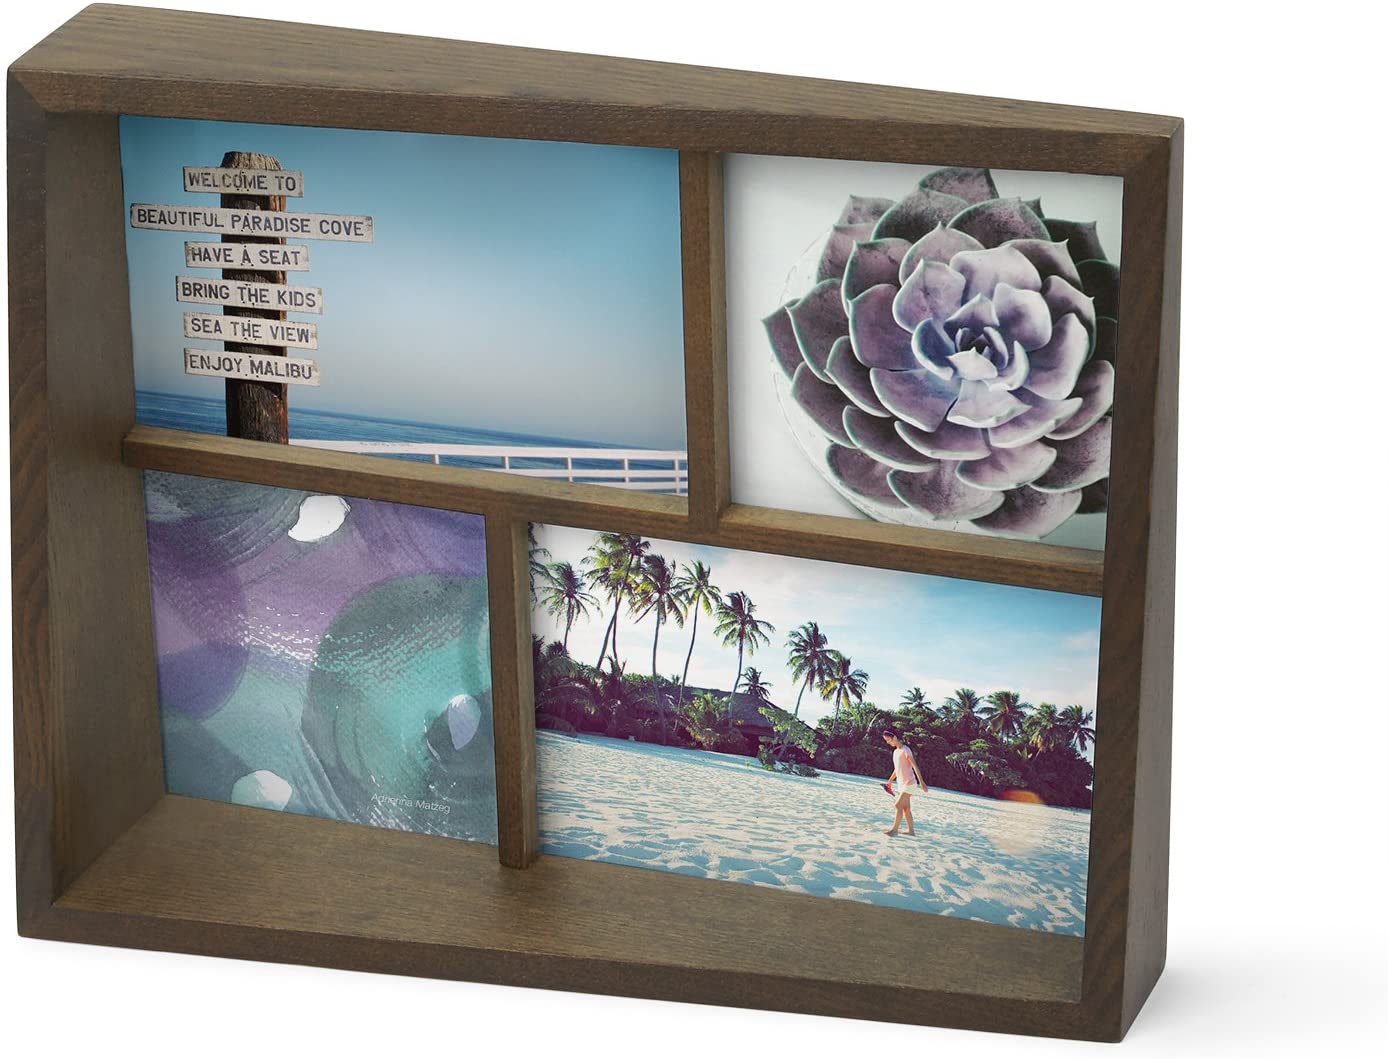 Umbra Edge Collage Photo Frame for 4 Photos, Pictures, Art Prints, Illustrations, Graphics and More - Modern Wall and Table Multi Photo Frame Made of Ash Wood, Antique Walnut